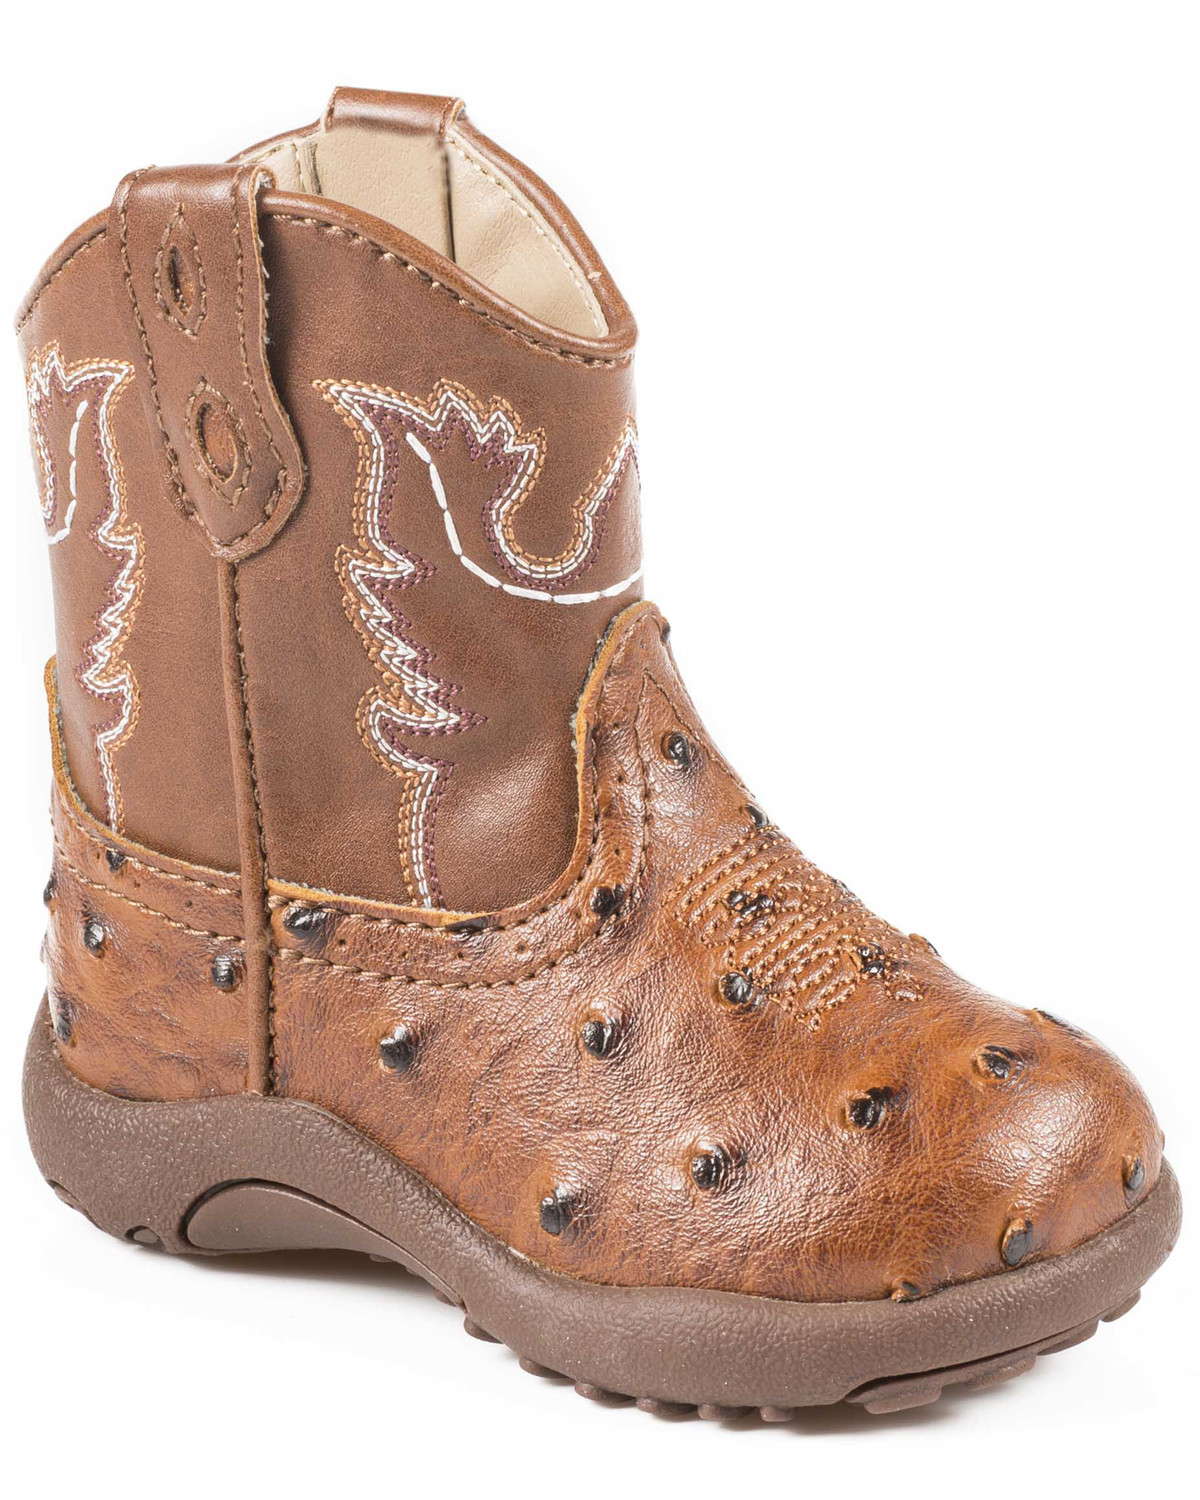 Roper Cowbaby Ostrich Western Boot Infant//Toddler